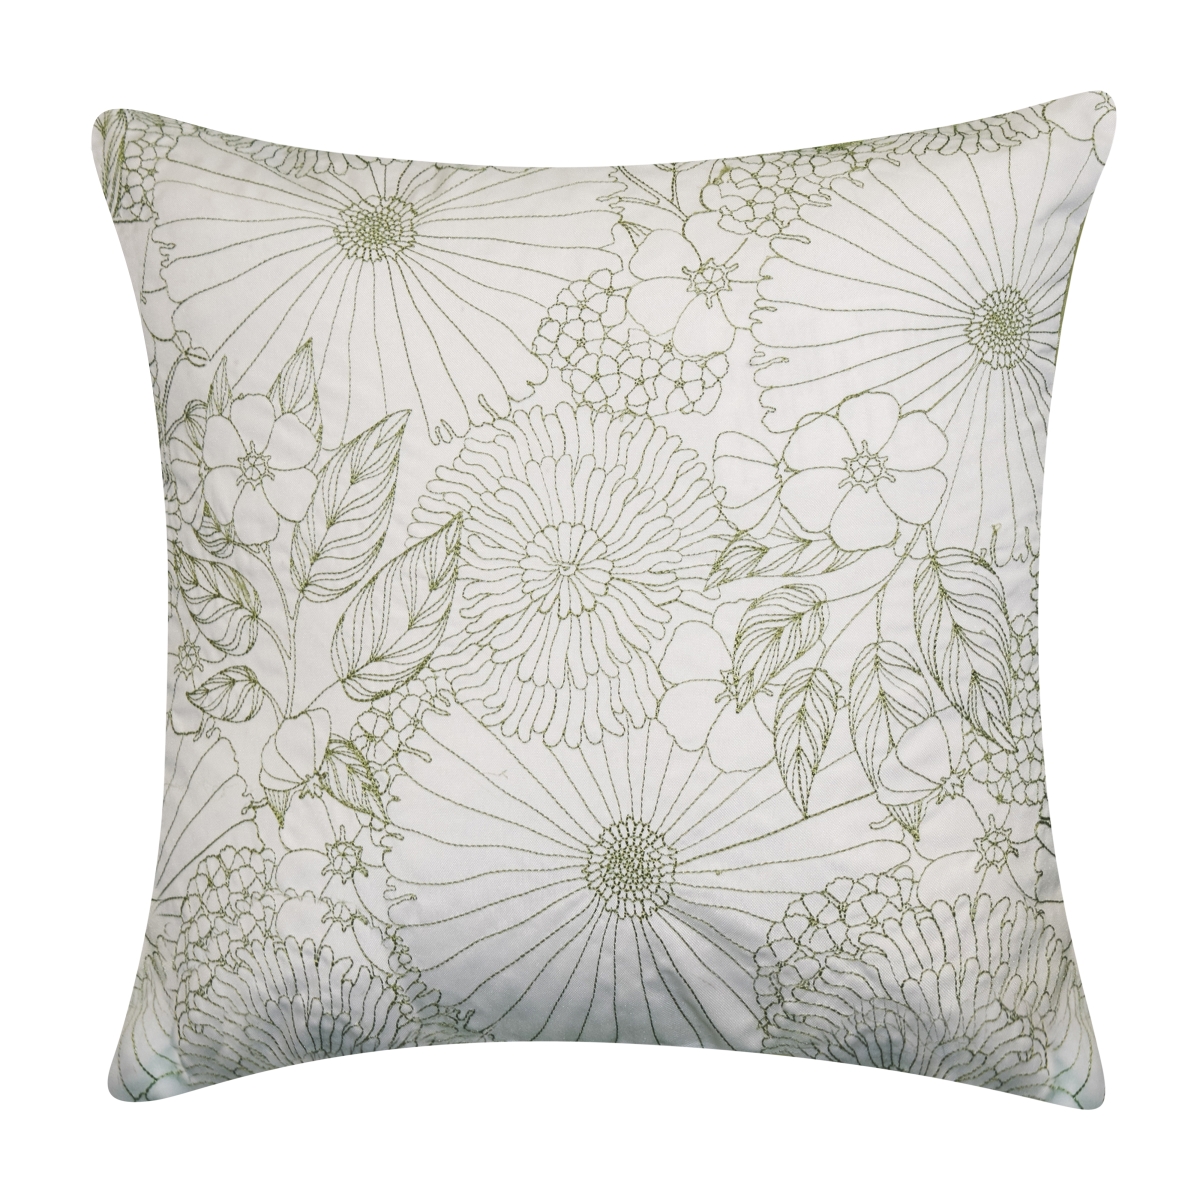 Eah089lw420527 18 X 18 In. Fine Line Embroidered Floral Indoor & Outdoor Decorative Pillow, Lime Green